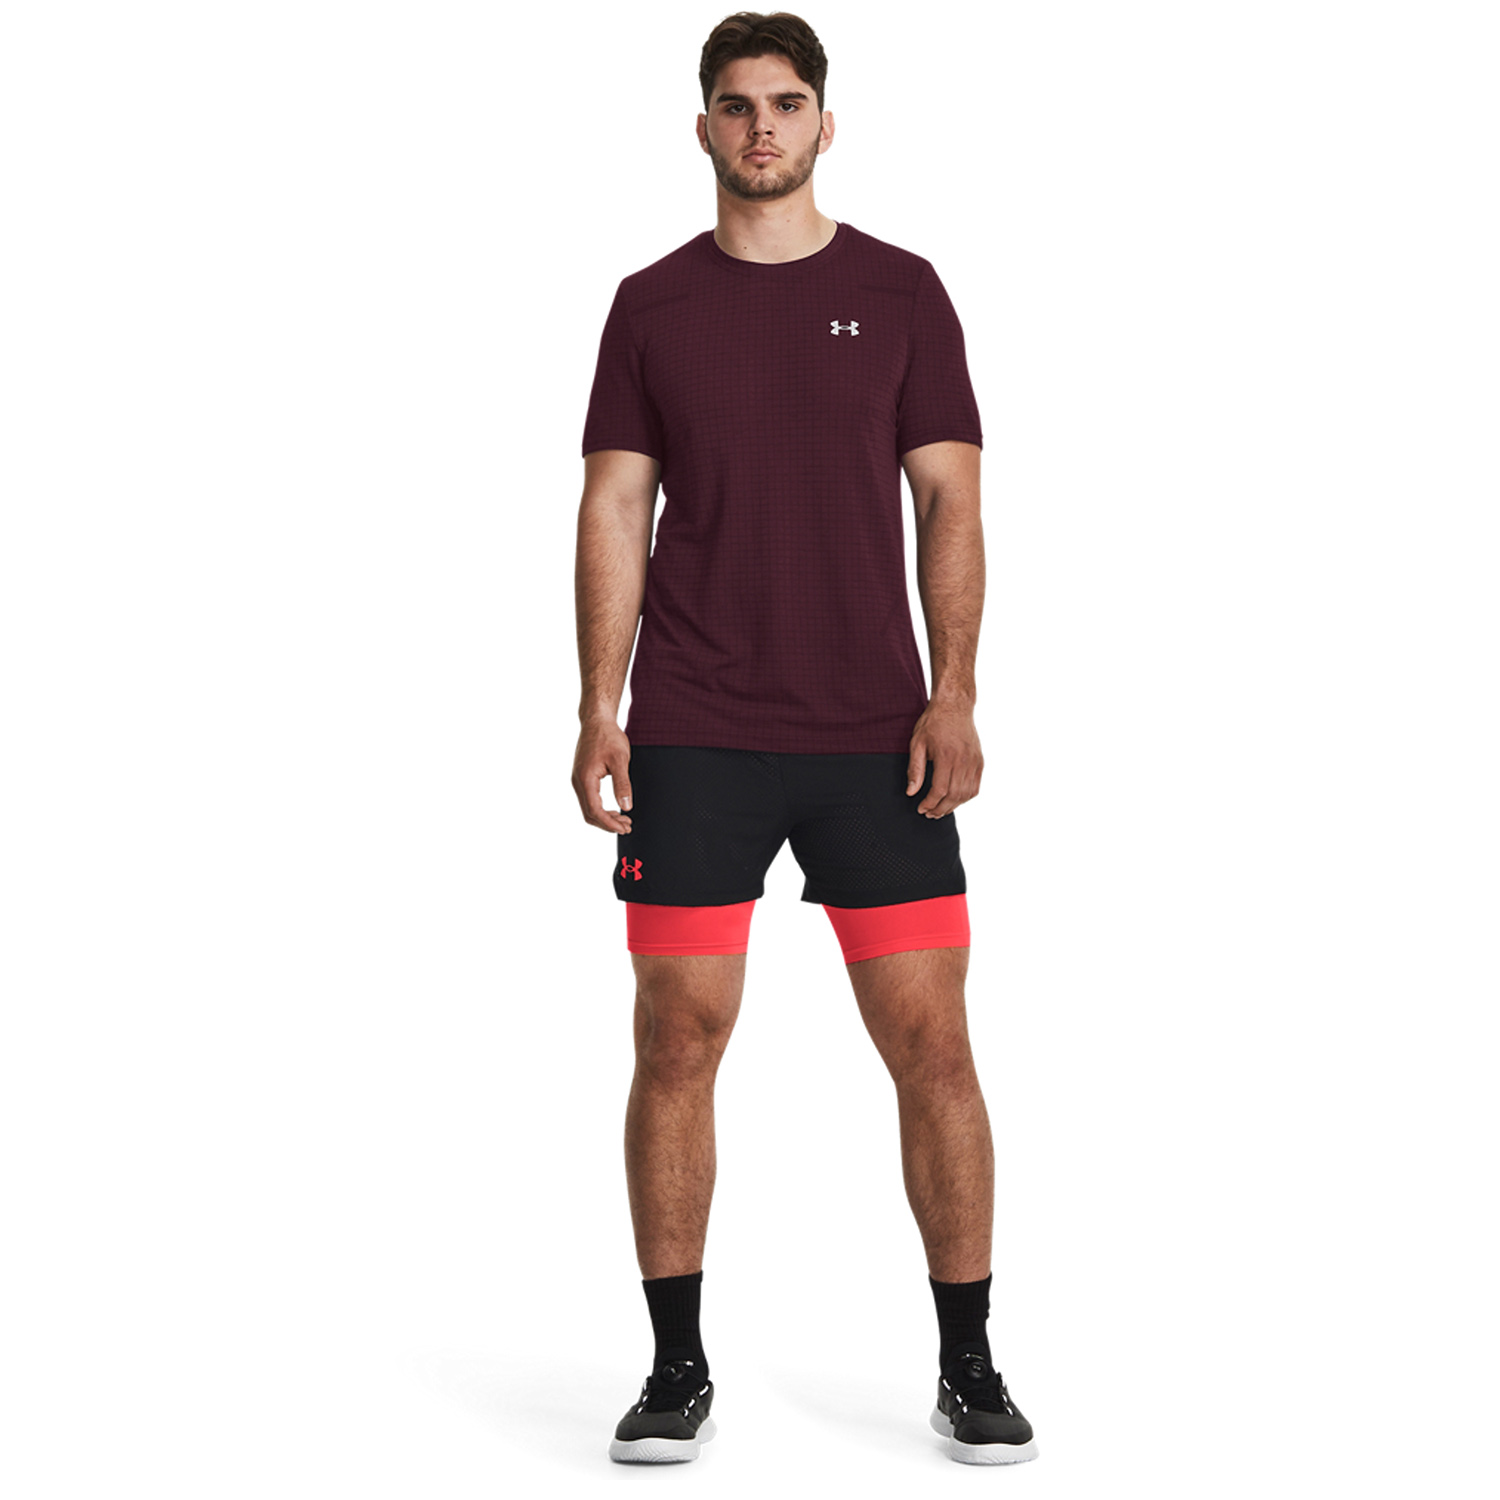 Under Armour Seamless Grid T-Shirt - Red/Black